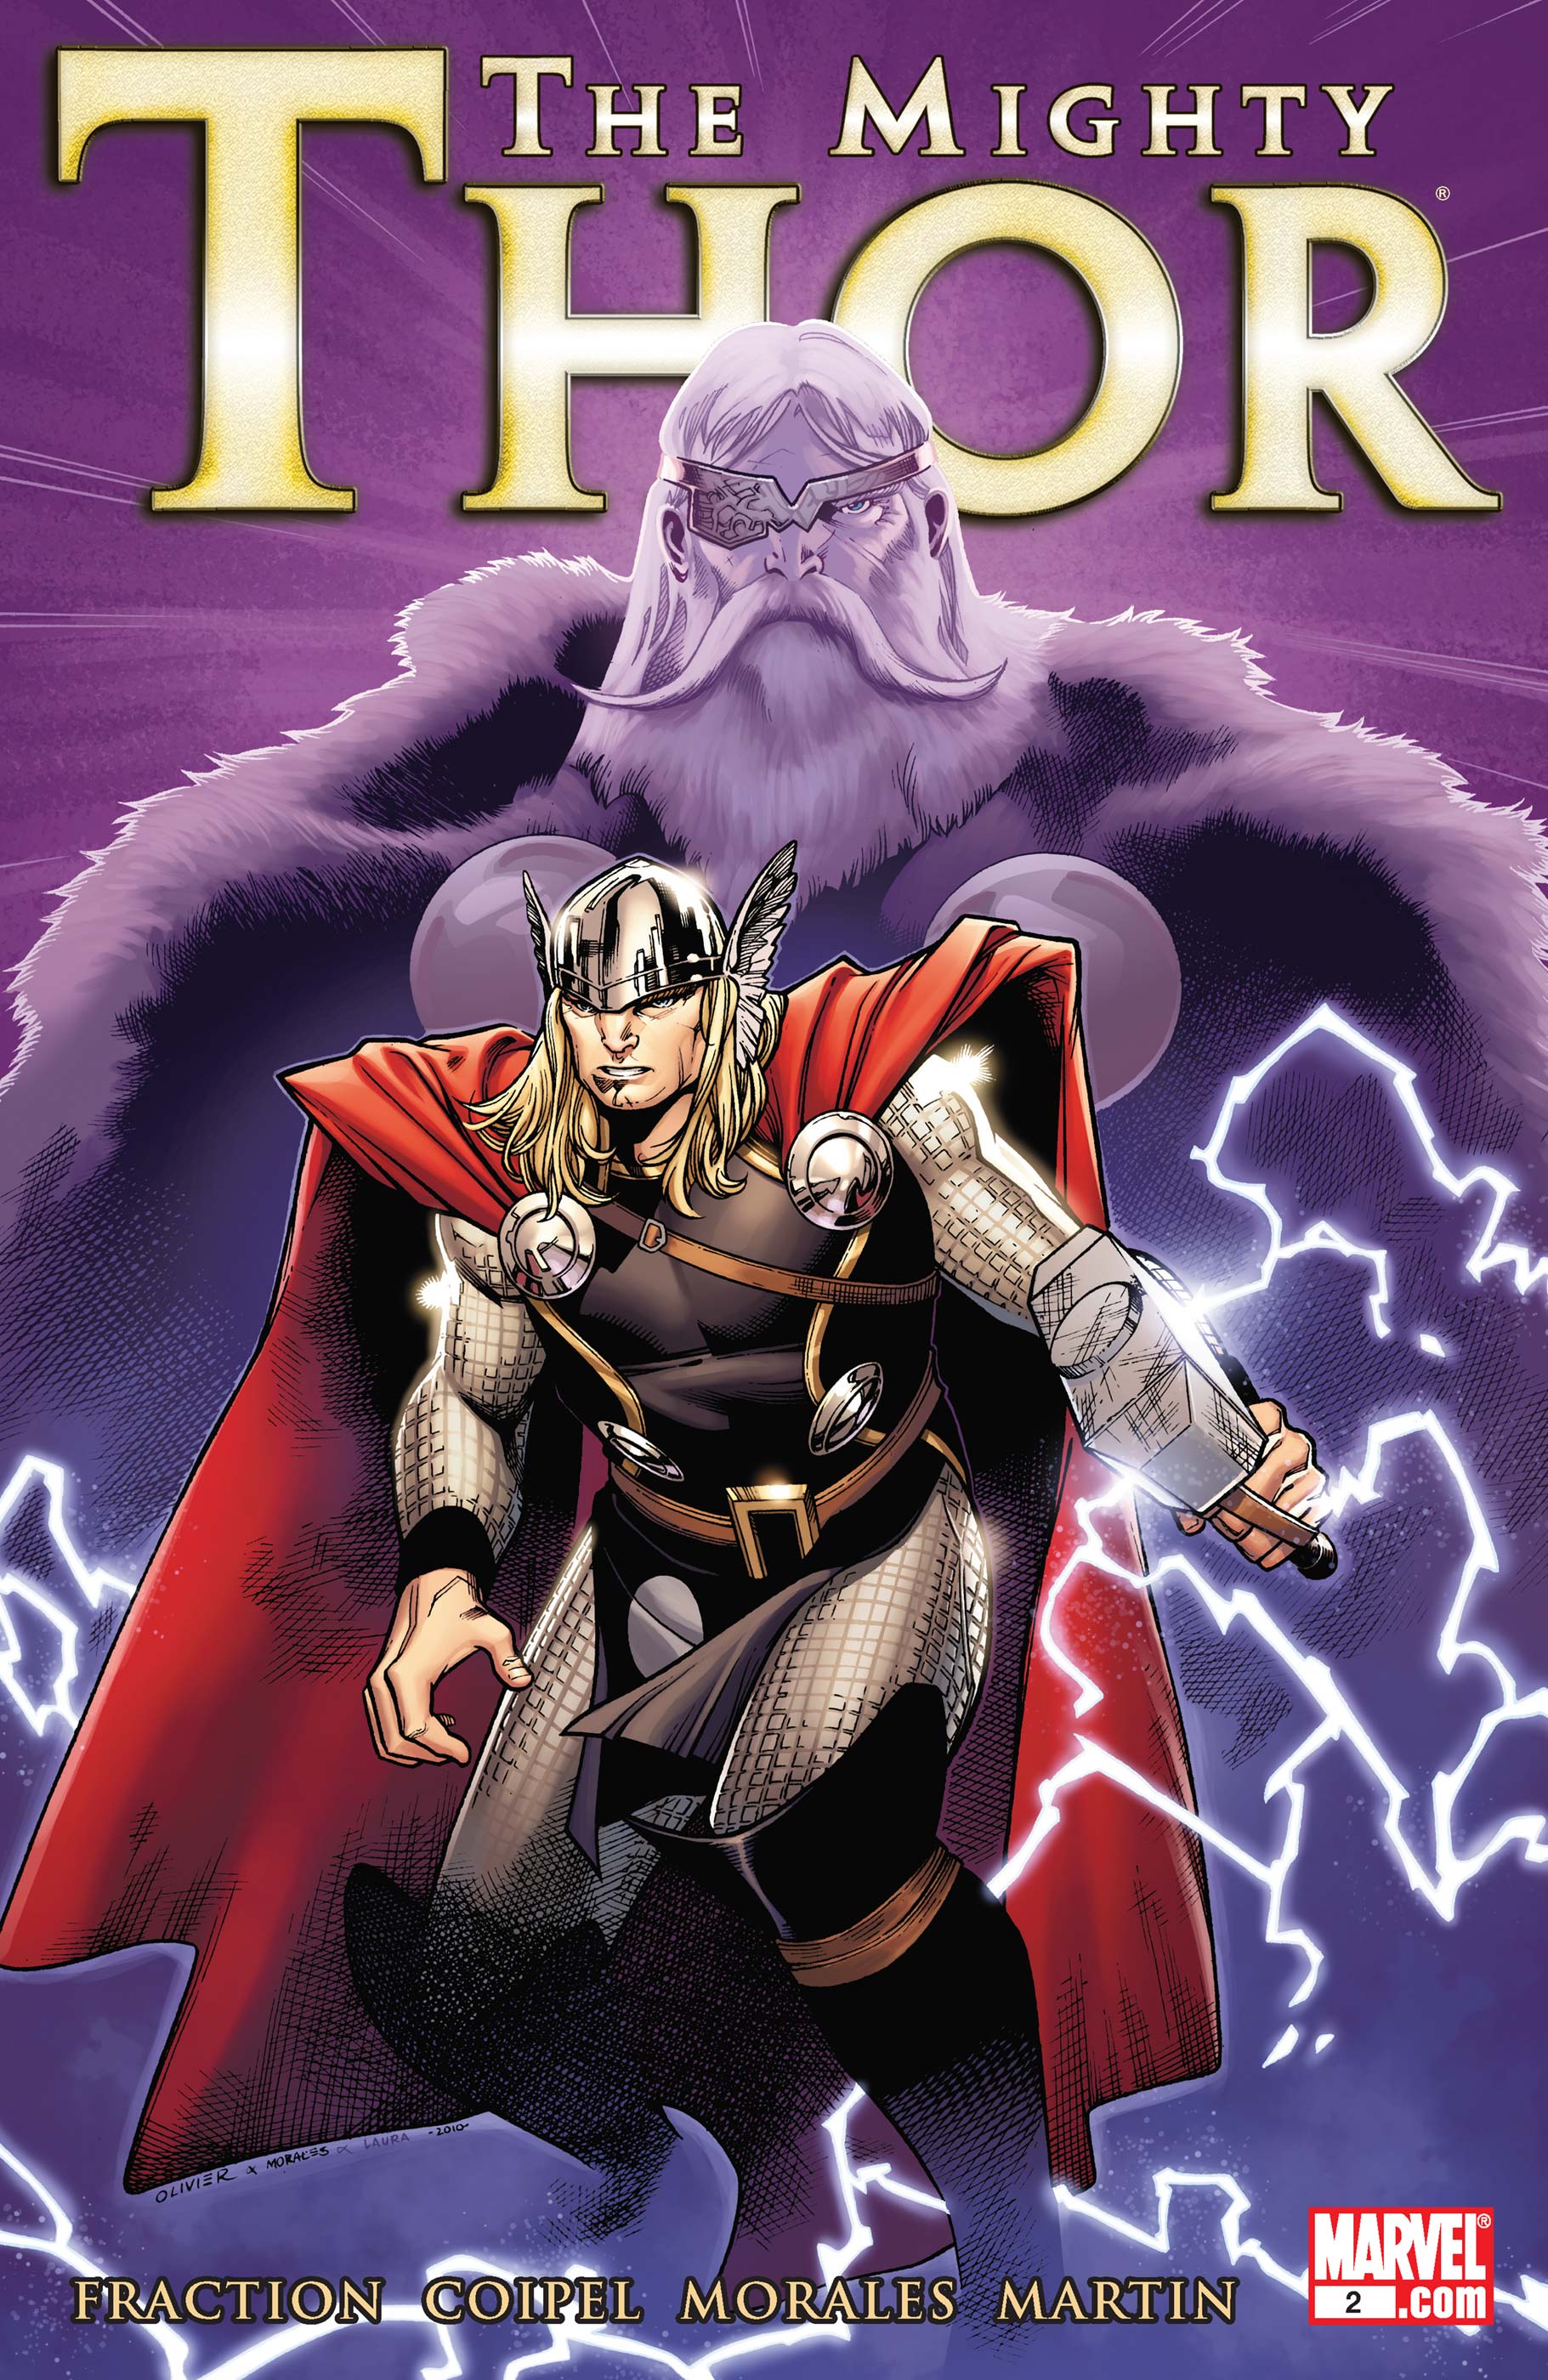 The Mighty Thor (2011) #2